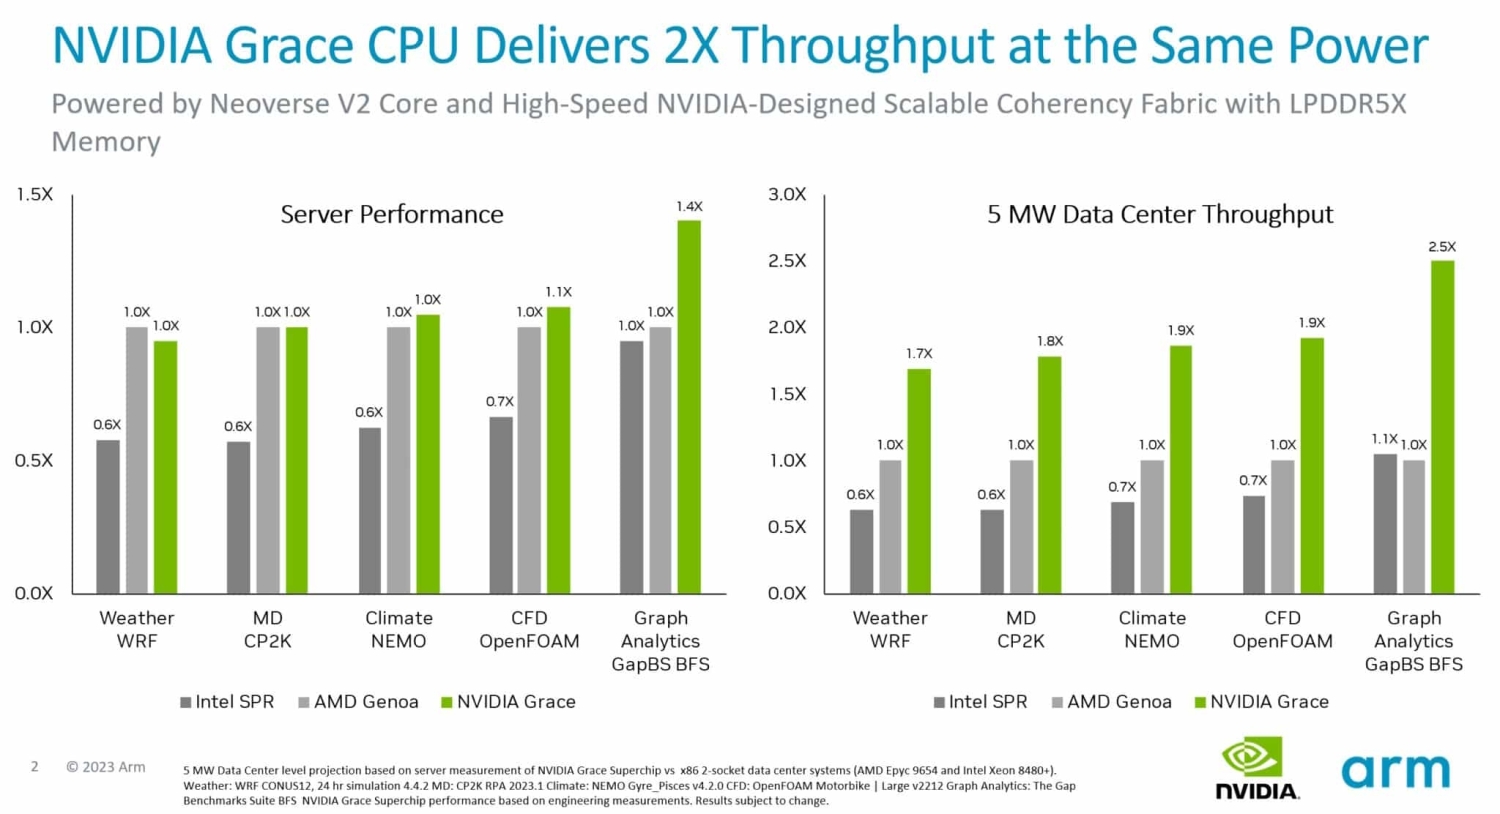 TweakTown Enlarged Image - NVIDIA's Grace CPU Superchip compared to AMD's EPYC Genoa and Intel's Sapphire Rapids Xeon processors, image credit: NVIDIA. 